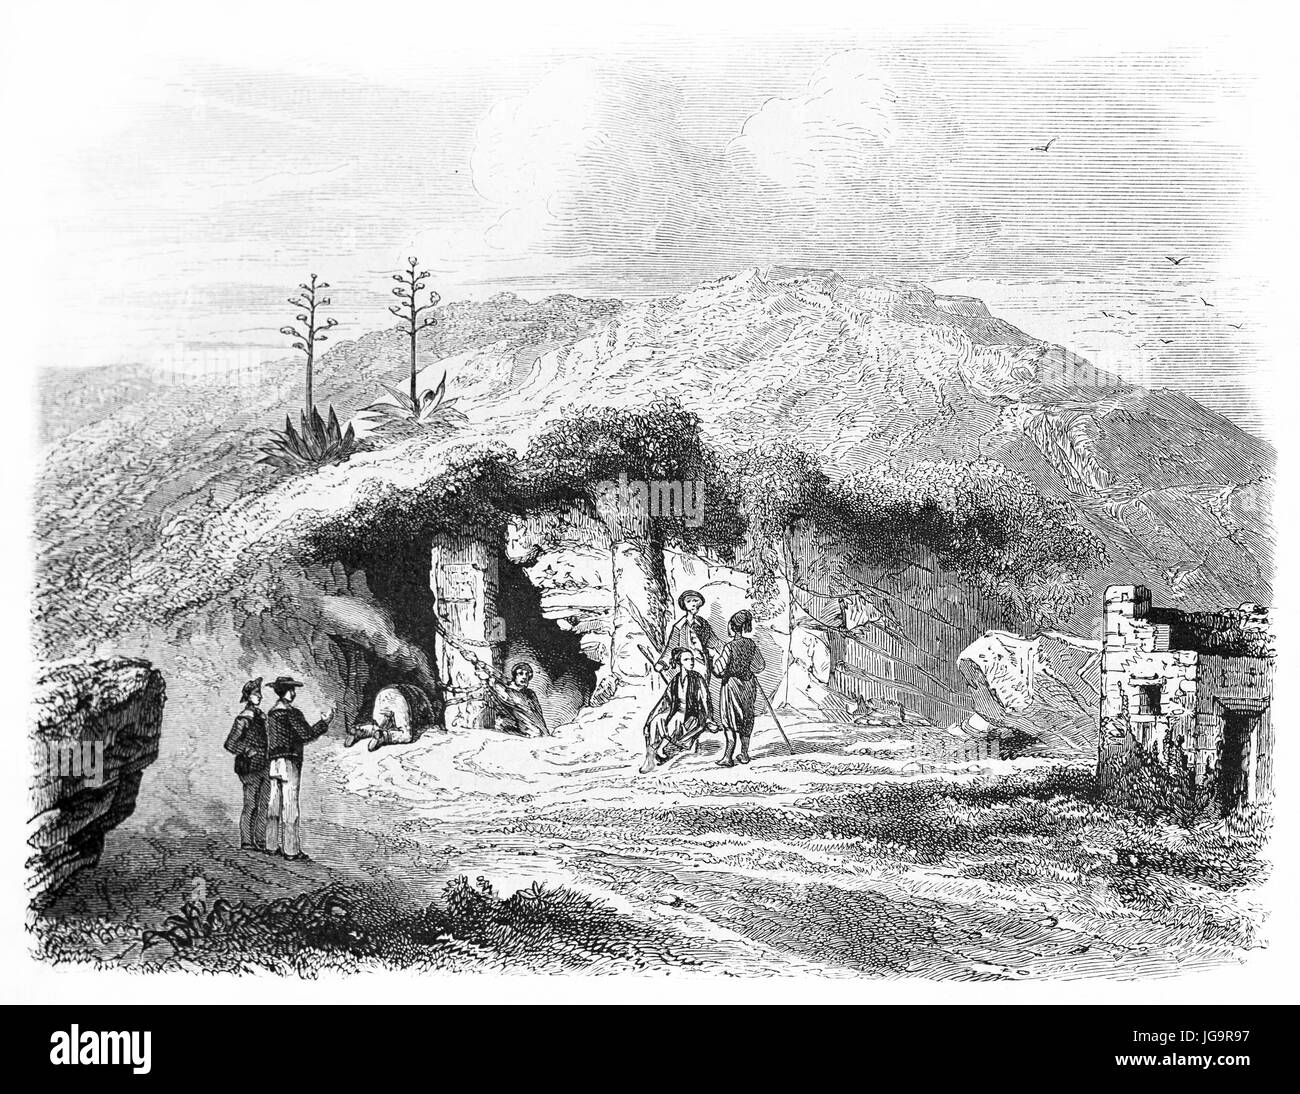 Old view of Cave of Antiparos mouth, Cyclades islands, Greece. Created by Rouargue after Spoll, published on Le Tour du Monde, Paris, 1861 Stock Photo